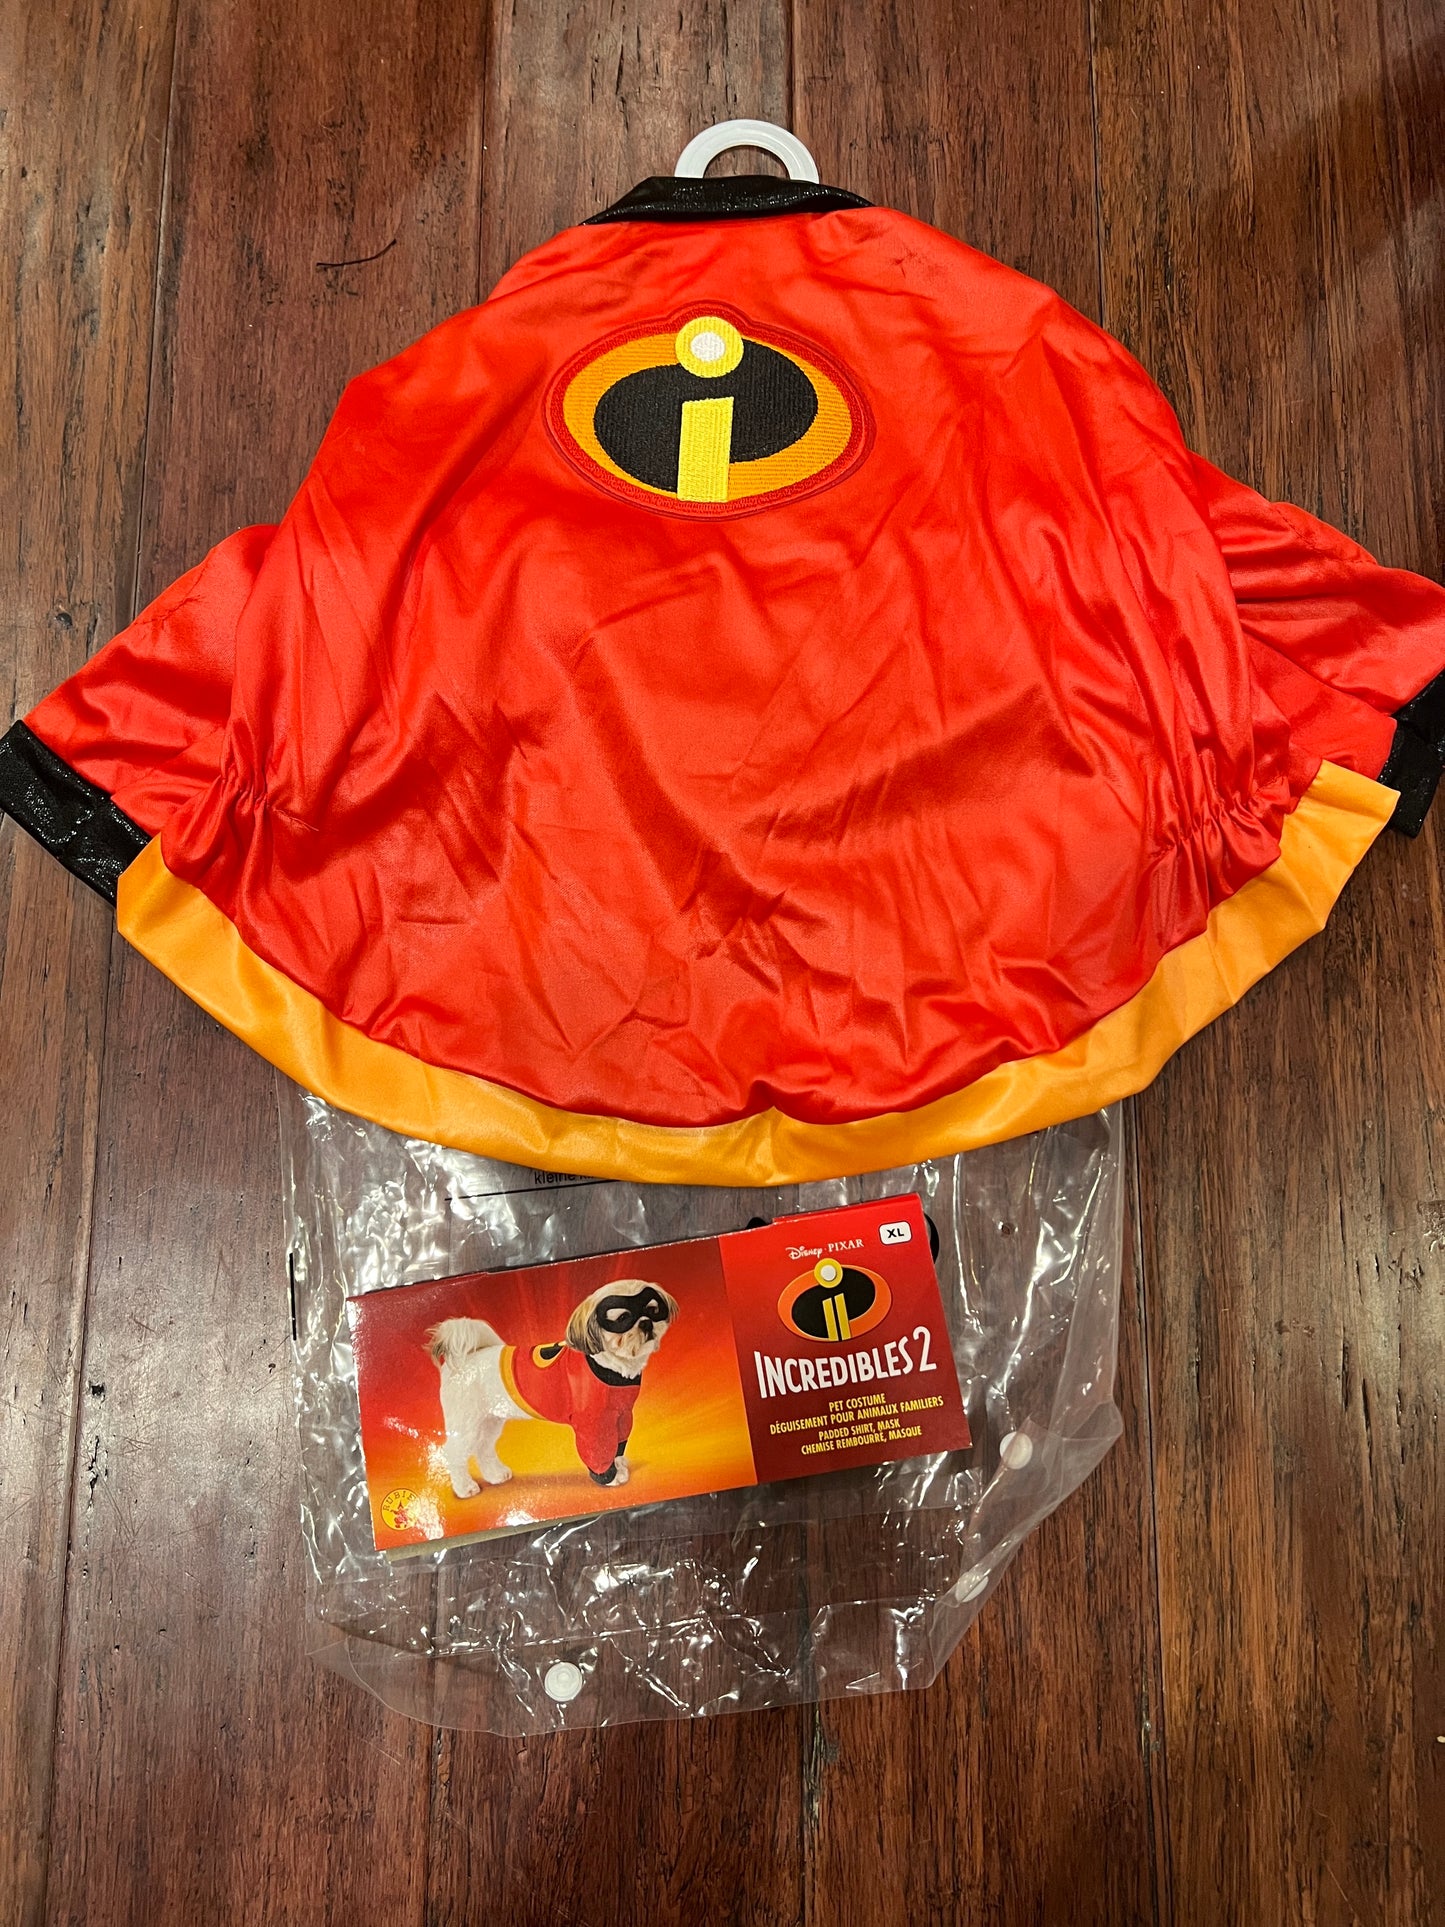 XL Dog Incredibles Costume NWT PPU Anderson